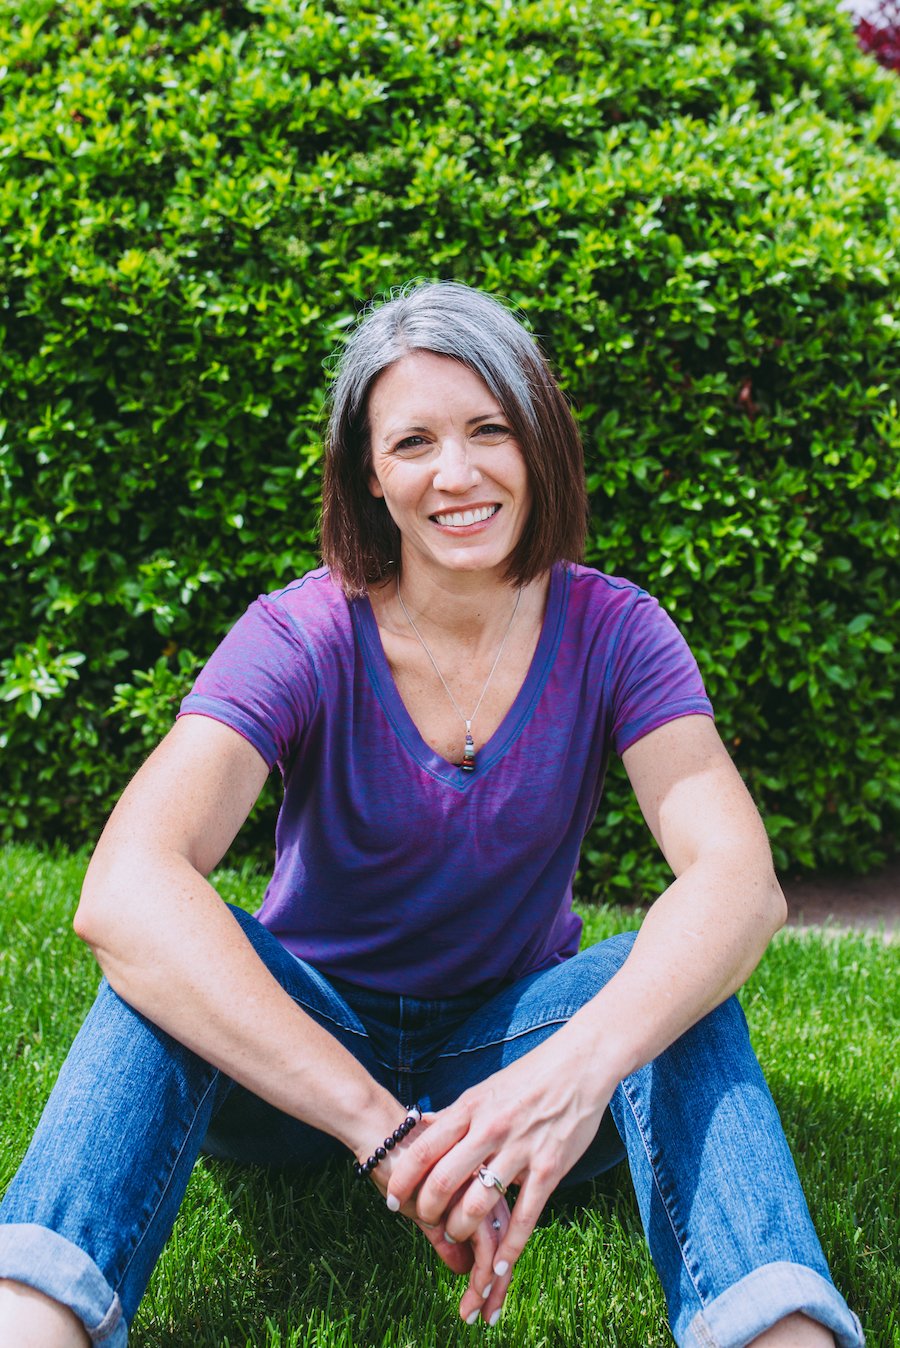 Beth smiling wearing purple top and blue jeans with her arms resting on her knees seated in the grass, green bush behind her.